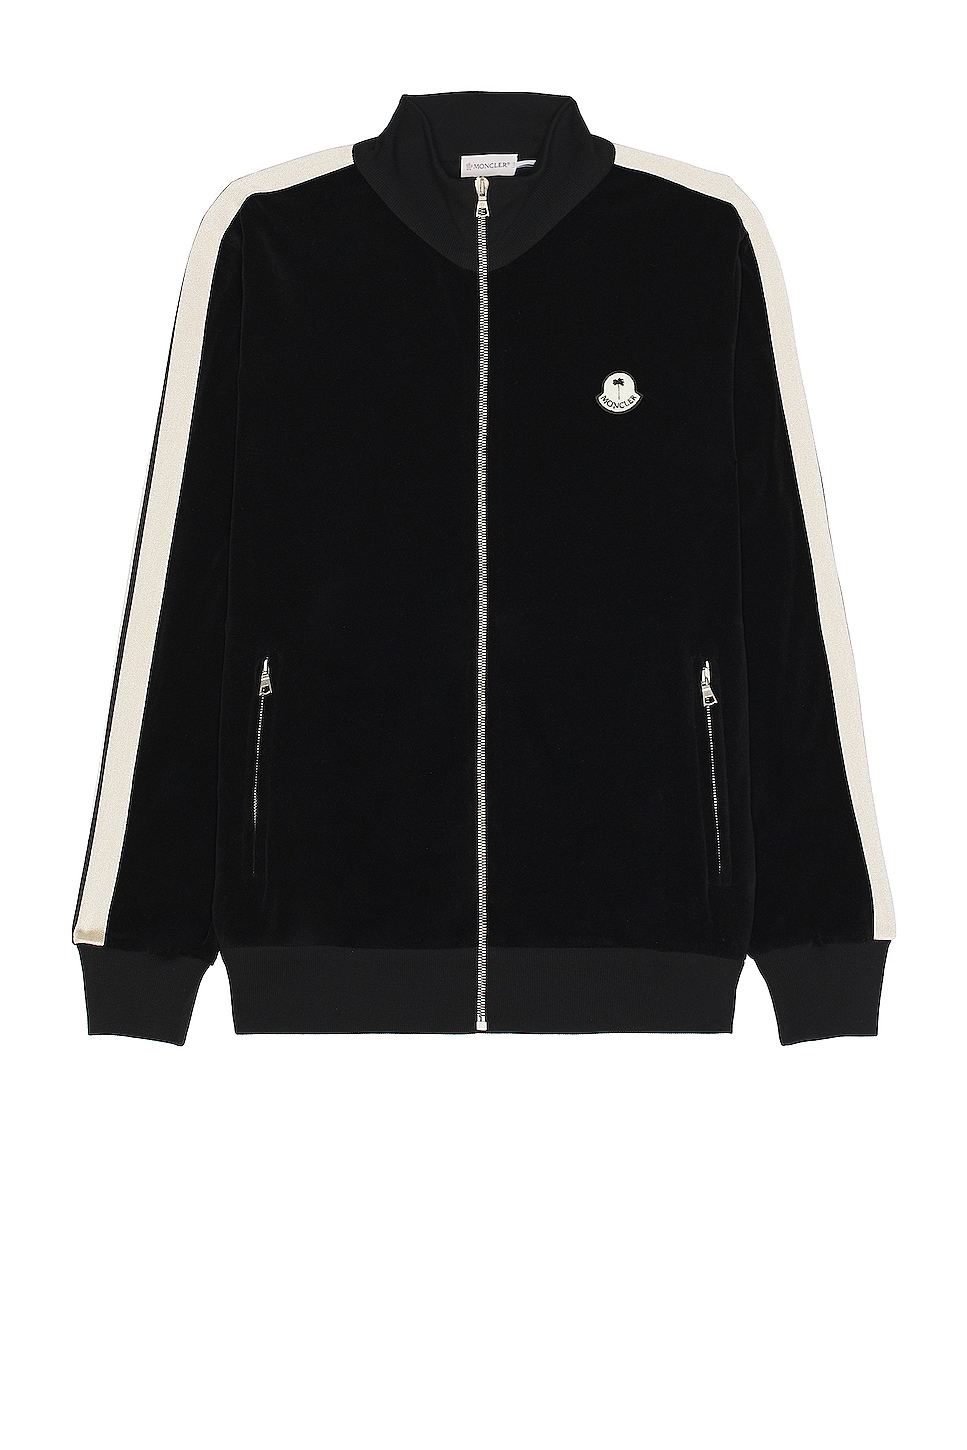 Image 1 of Moncler Genius x Palm Angels Zip Up Sweater in Black